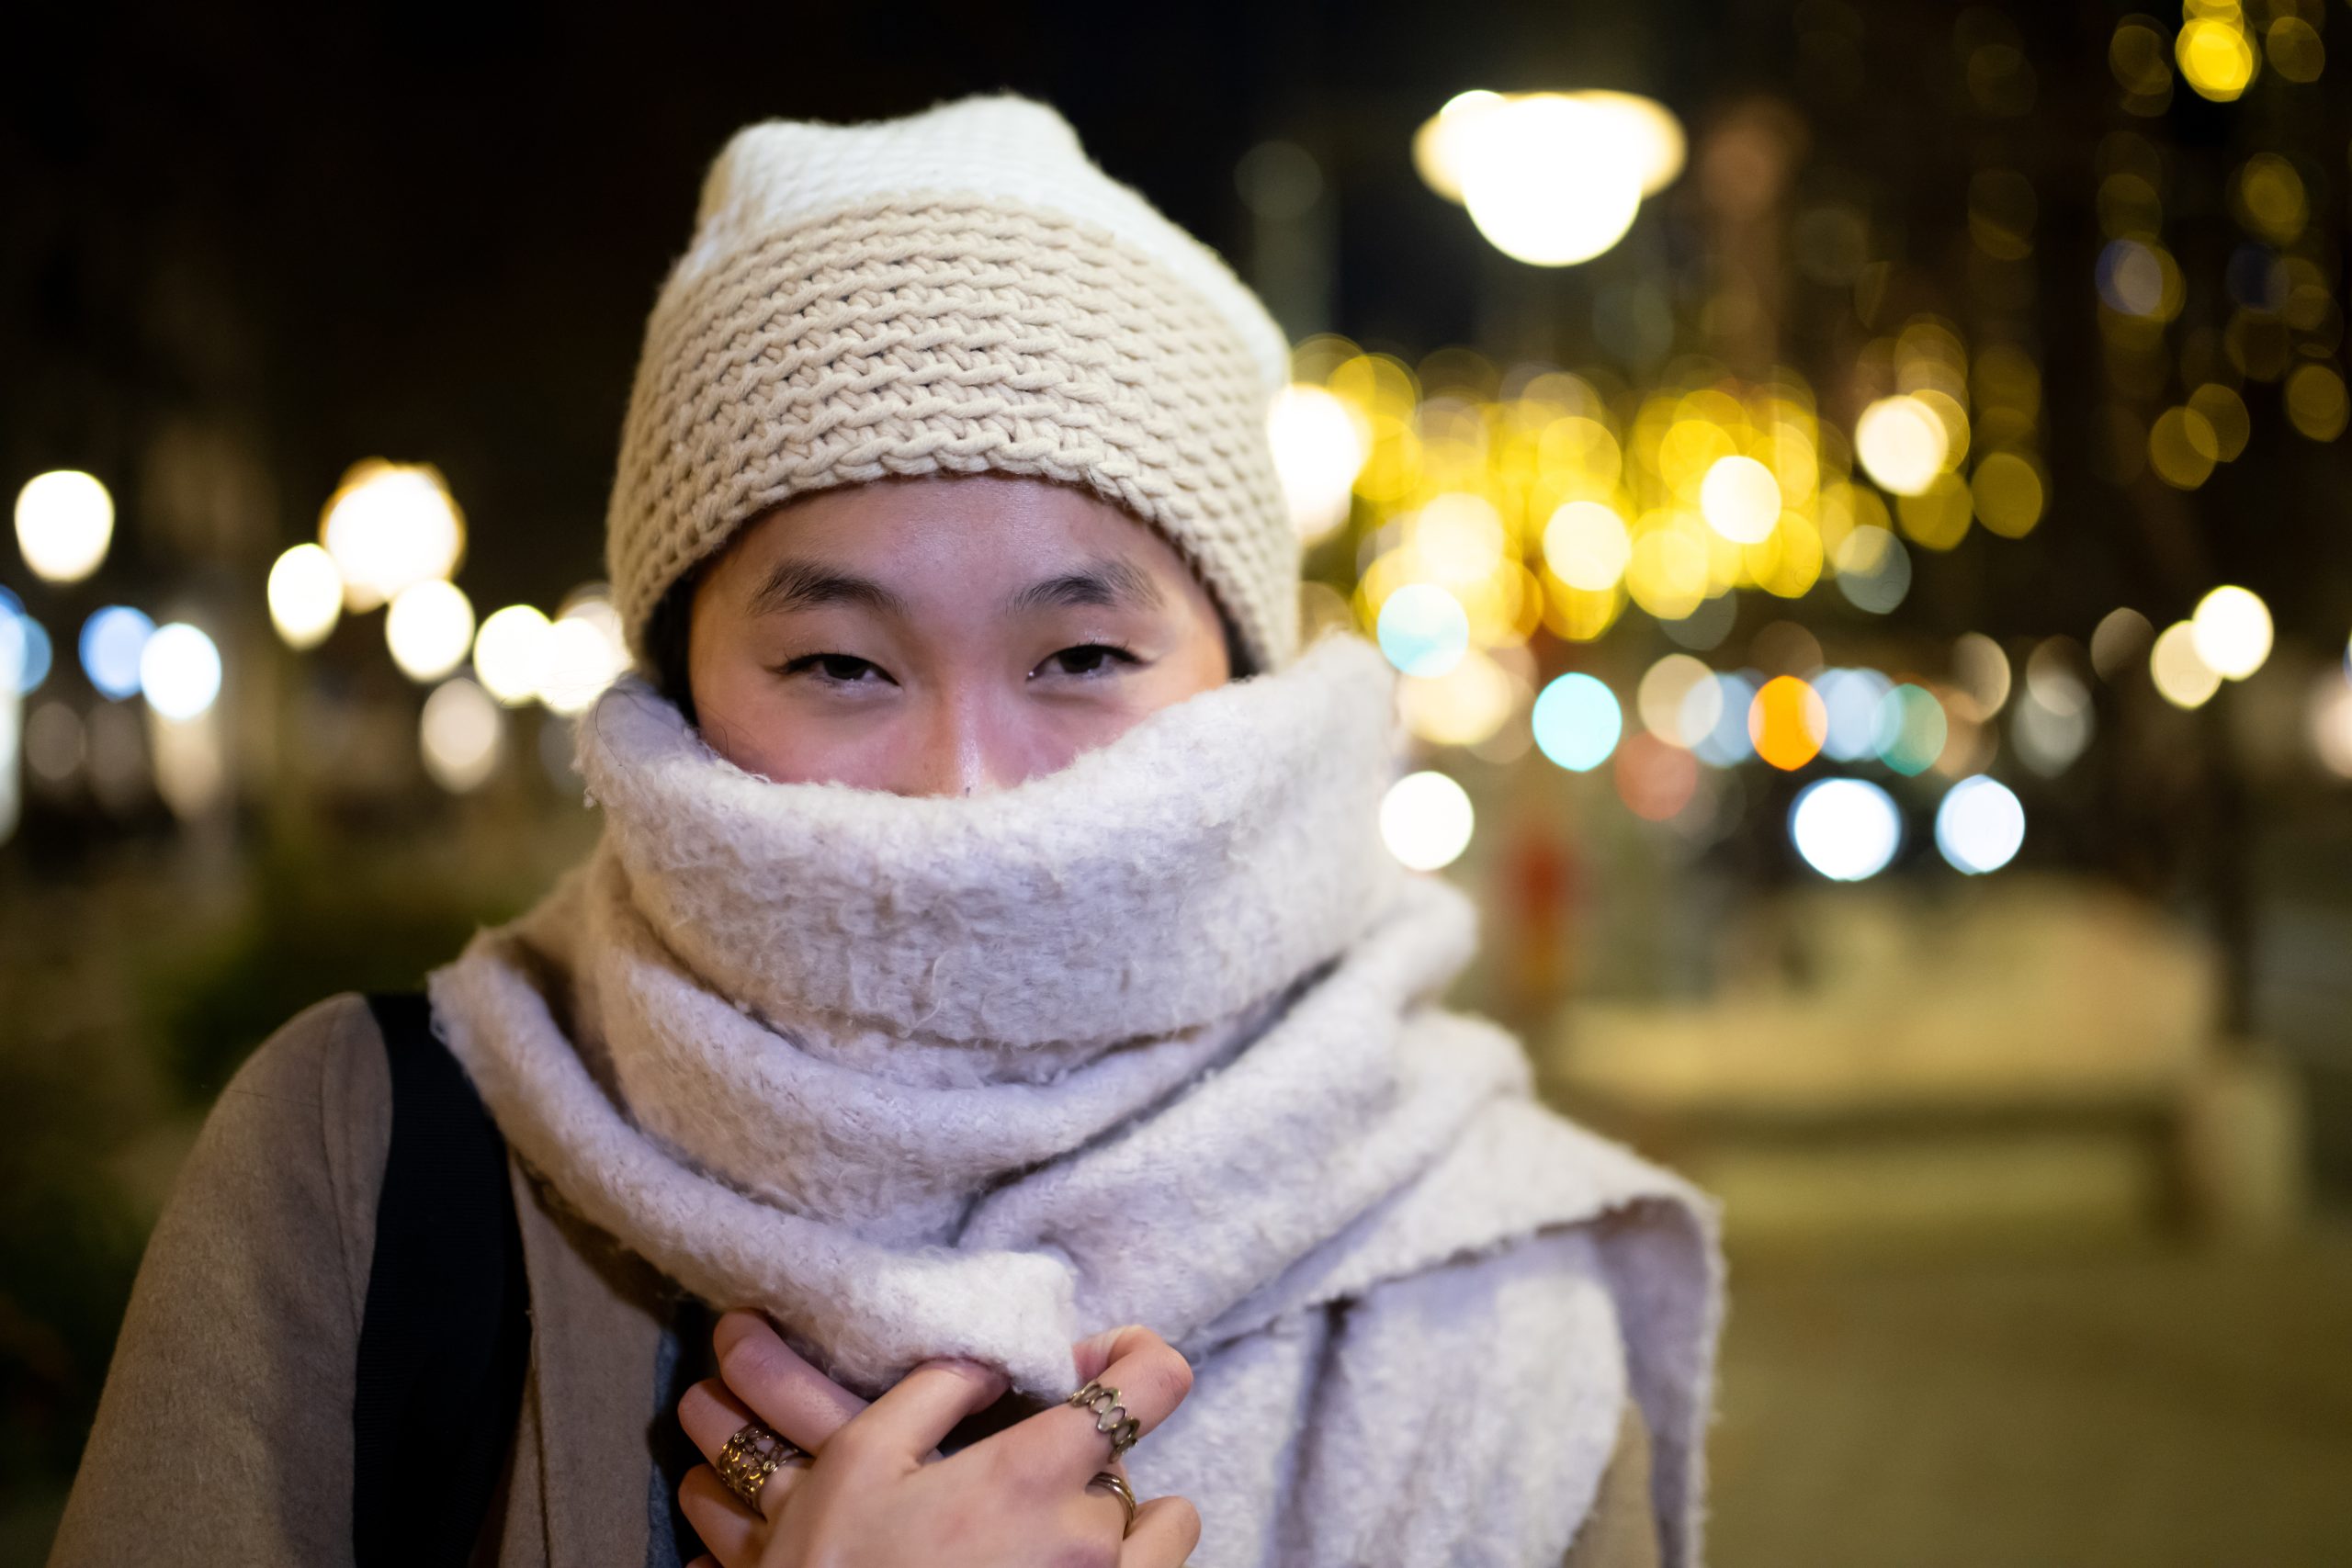 woman in scarf